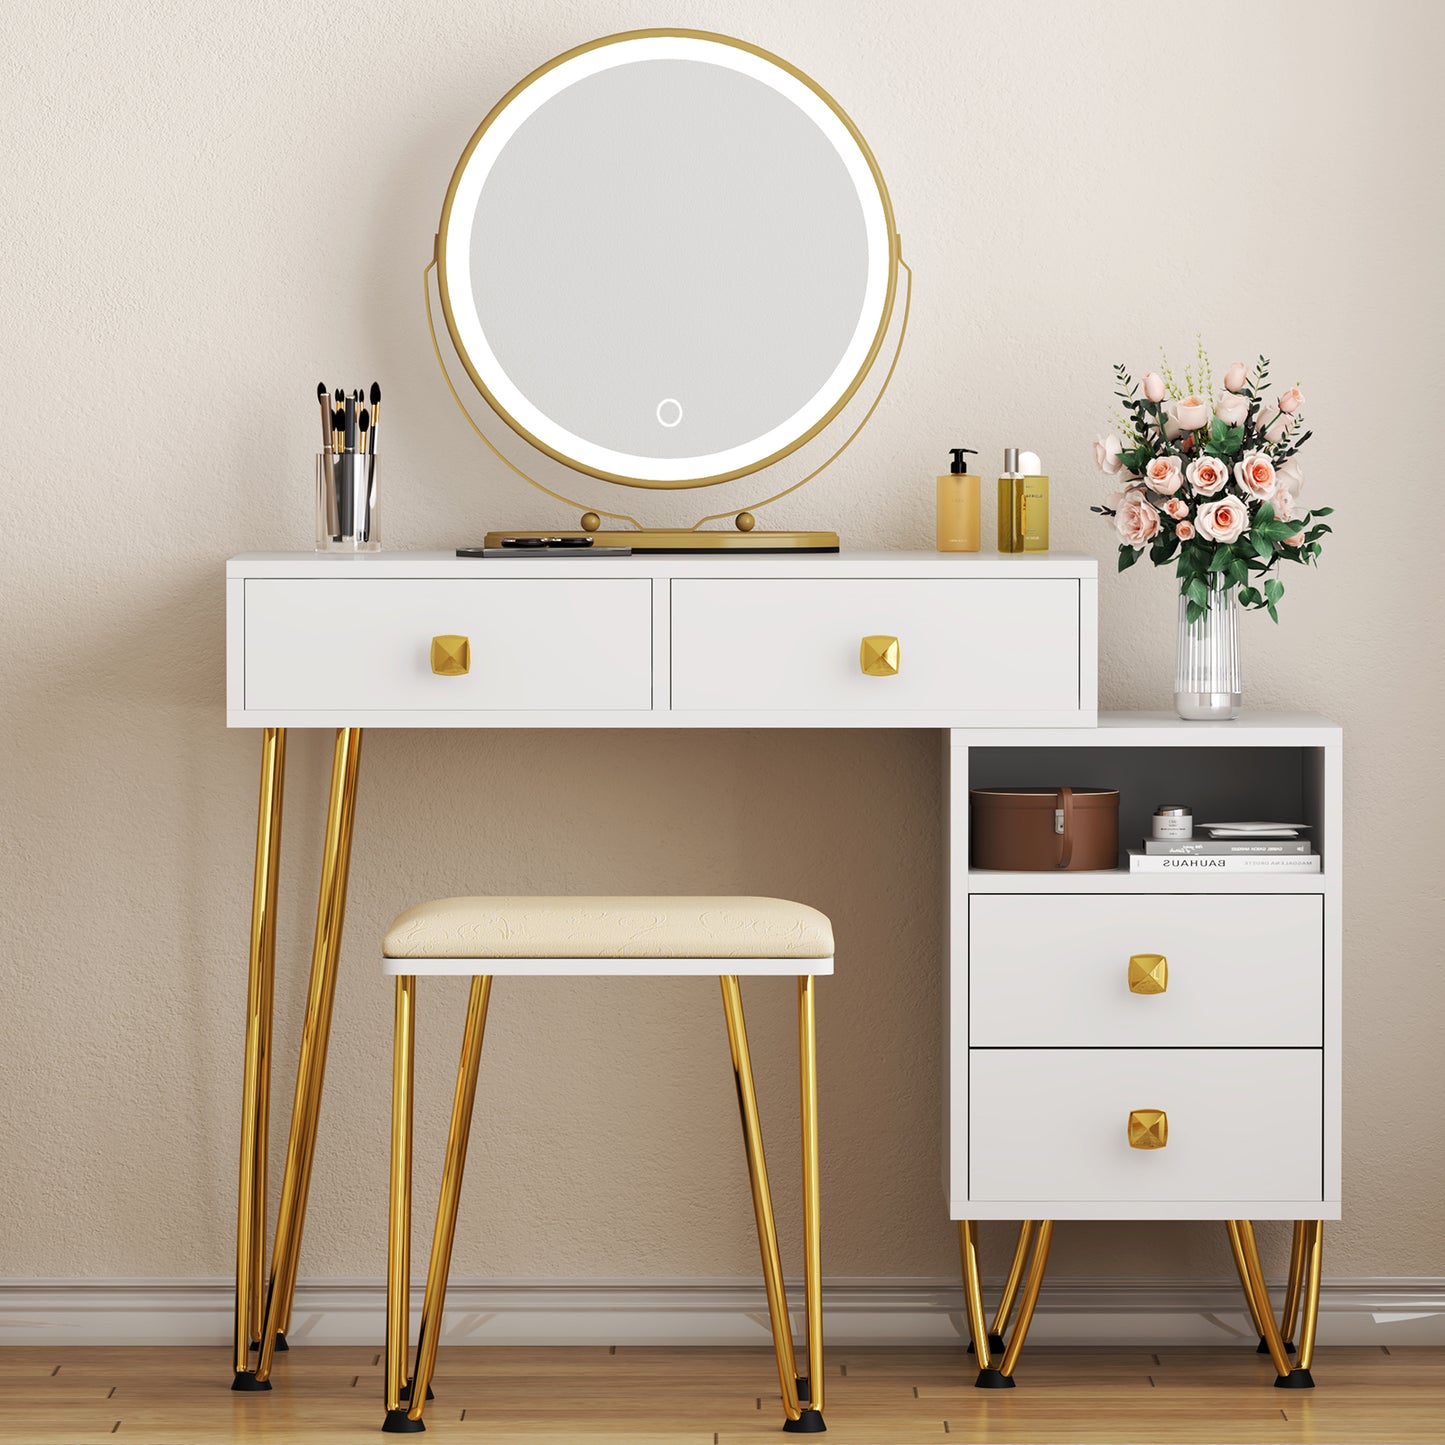 Soges White Dressing Table with Garden Mirror - Stylish Design, Fashion Dressing Table with Solid Wood Frame, Christmas, Valentine's Day Gift